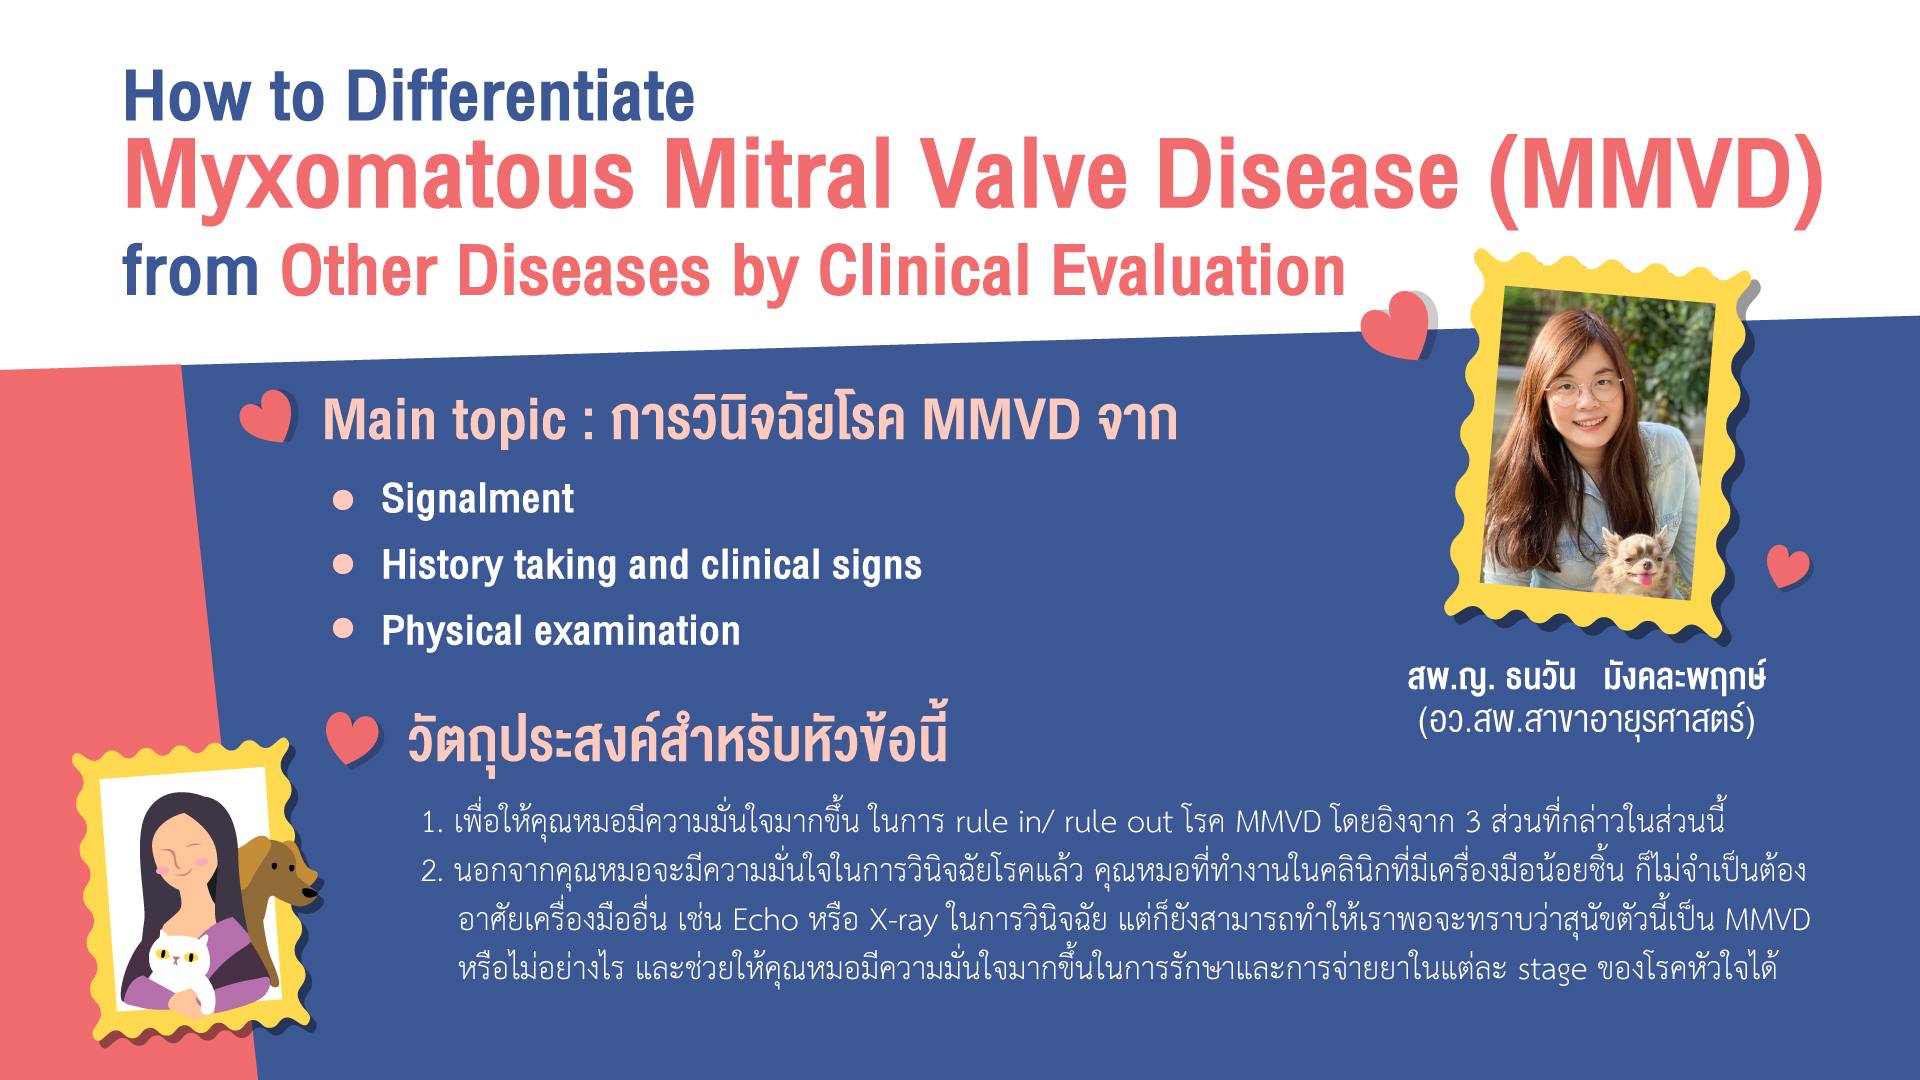 How to Differentiate Myxomatous Mitral Valve Disease (MMVD) from Other Diseases by Clinical Evaluation